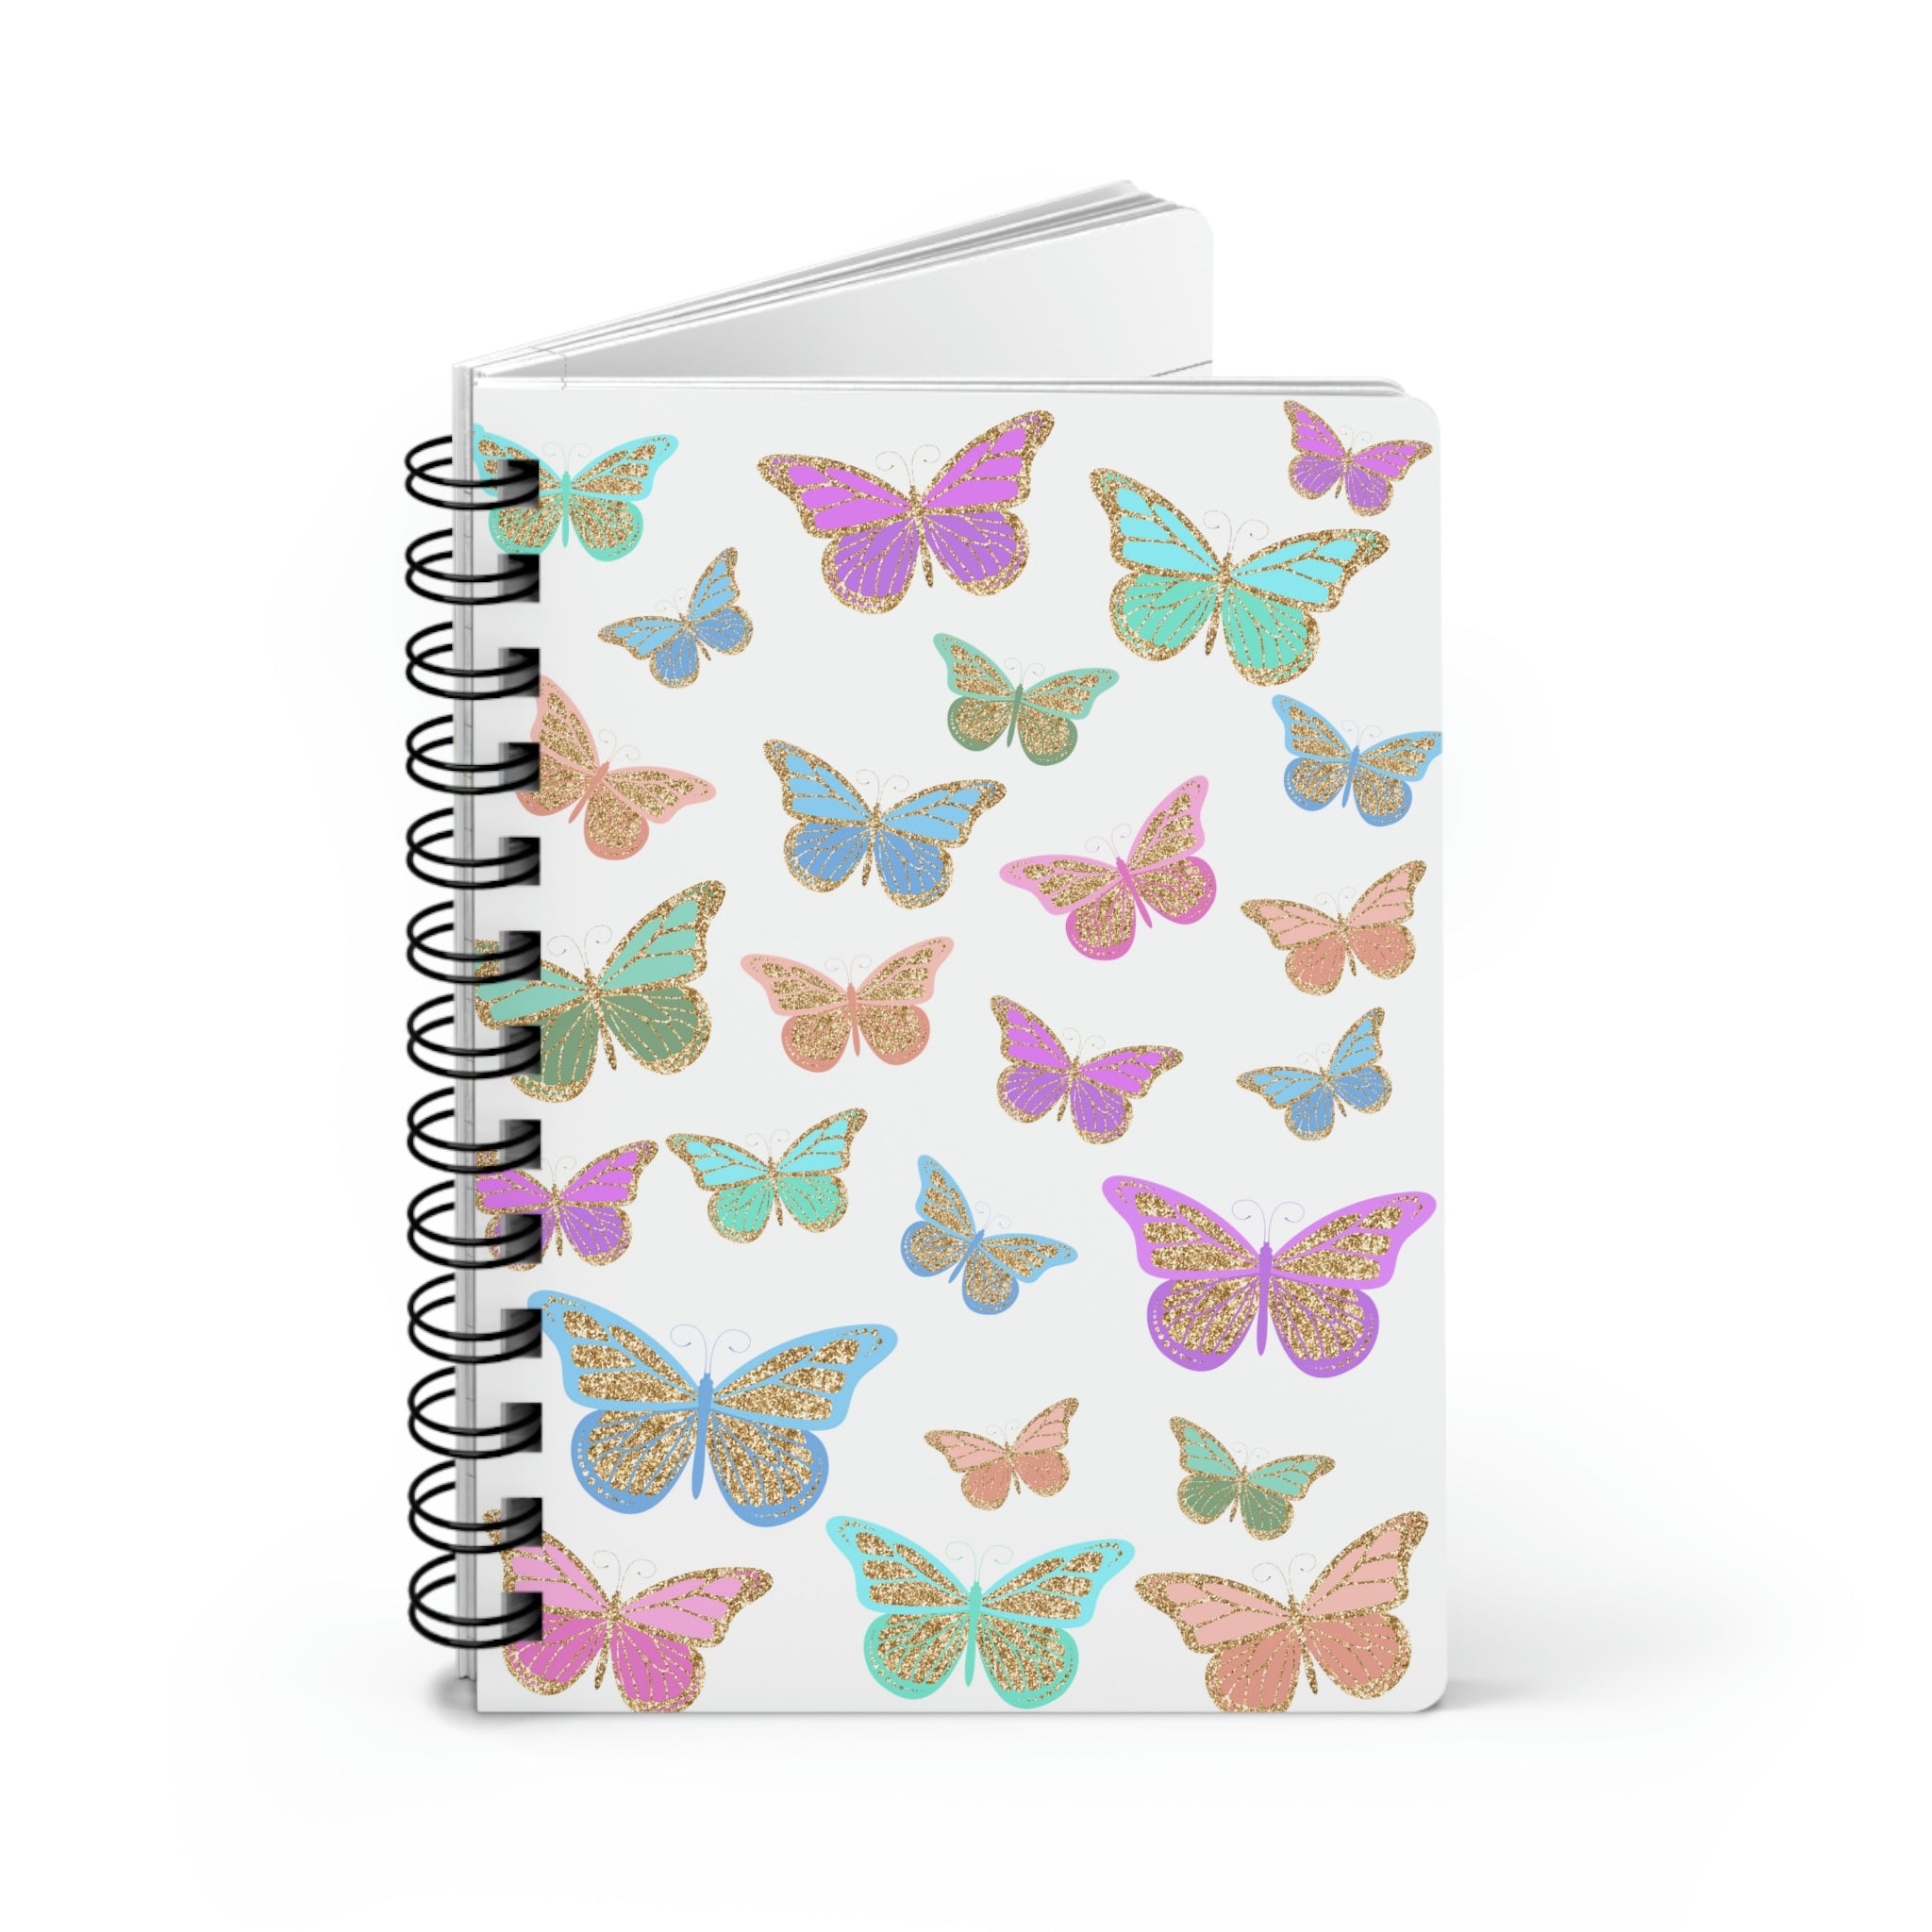 Sparkle Butterfly Spiral Bound Journal, Rule Lined Notebook 5x7" - Durazza